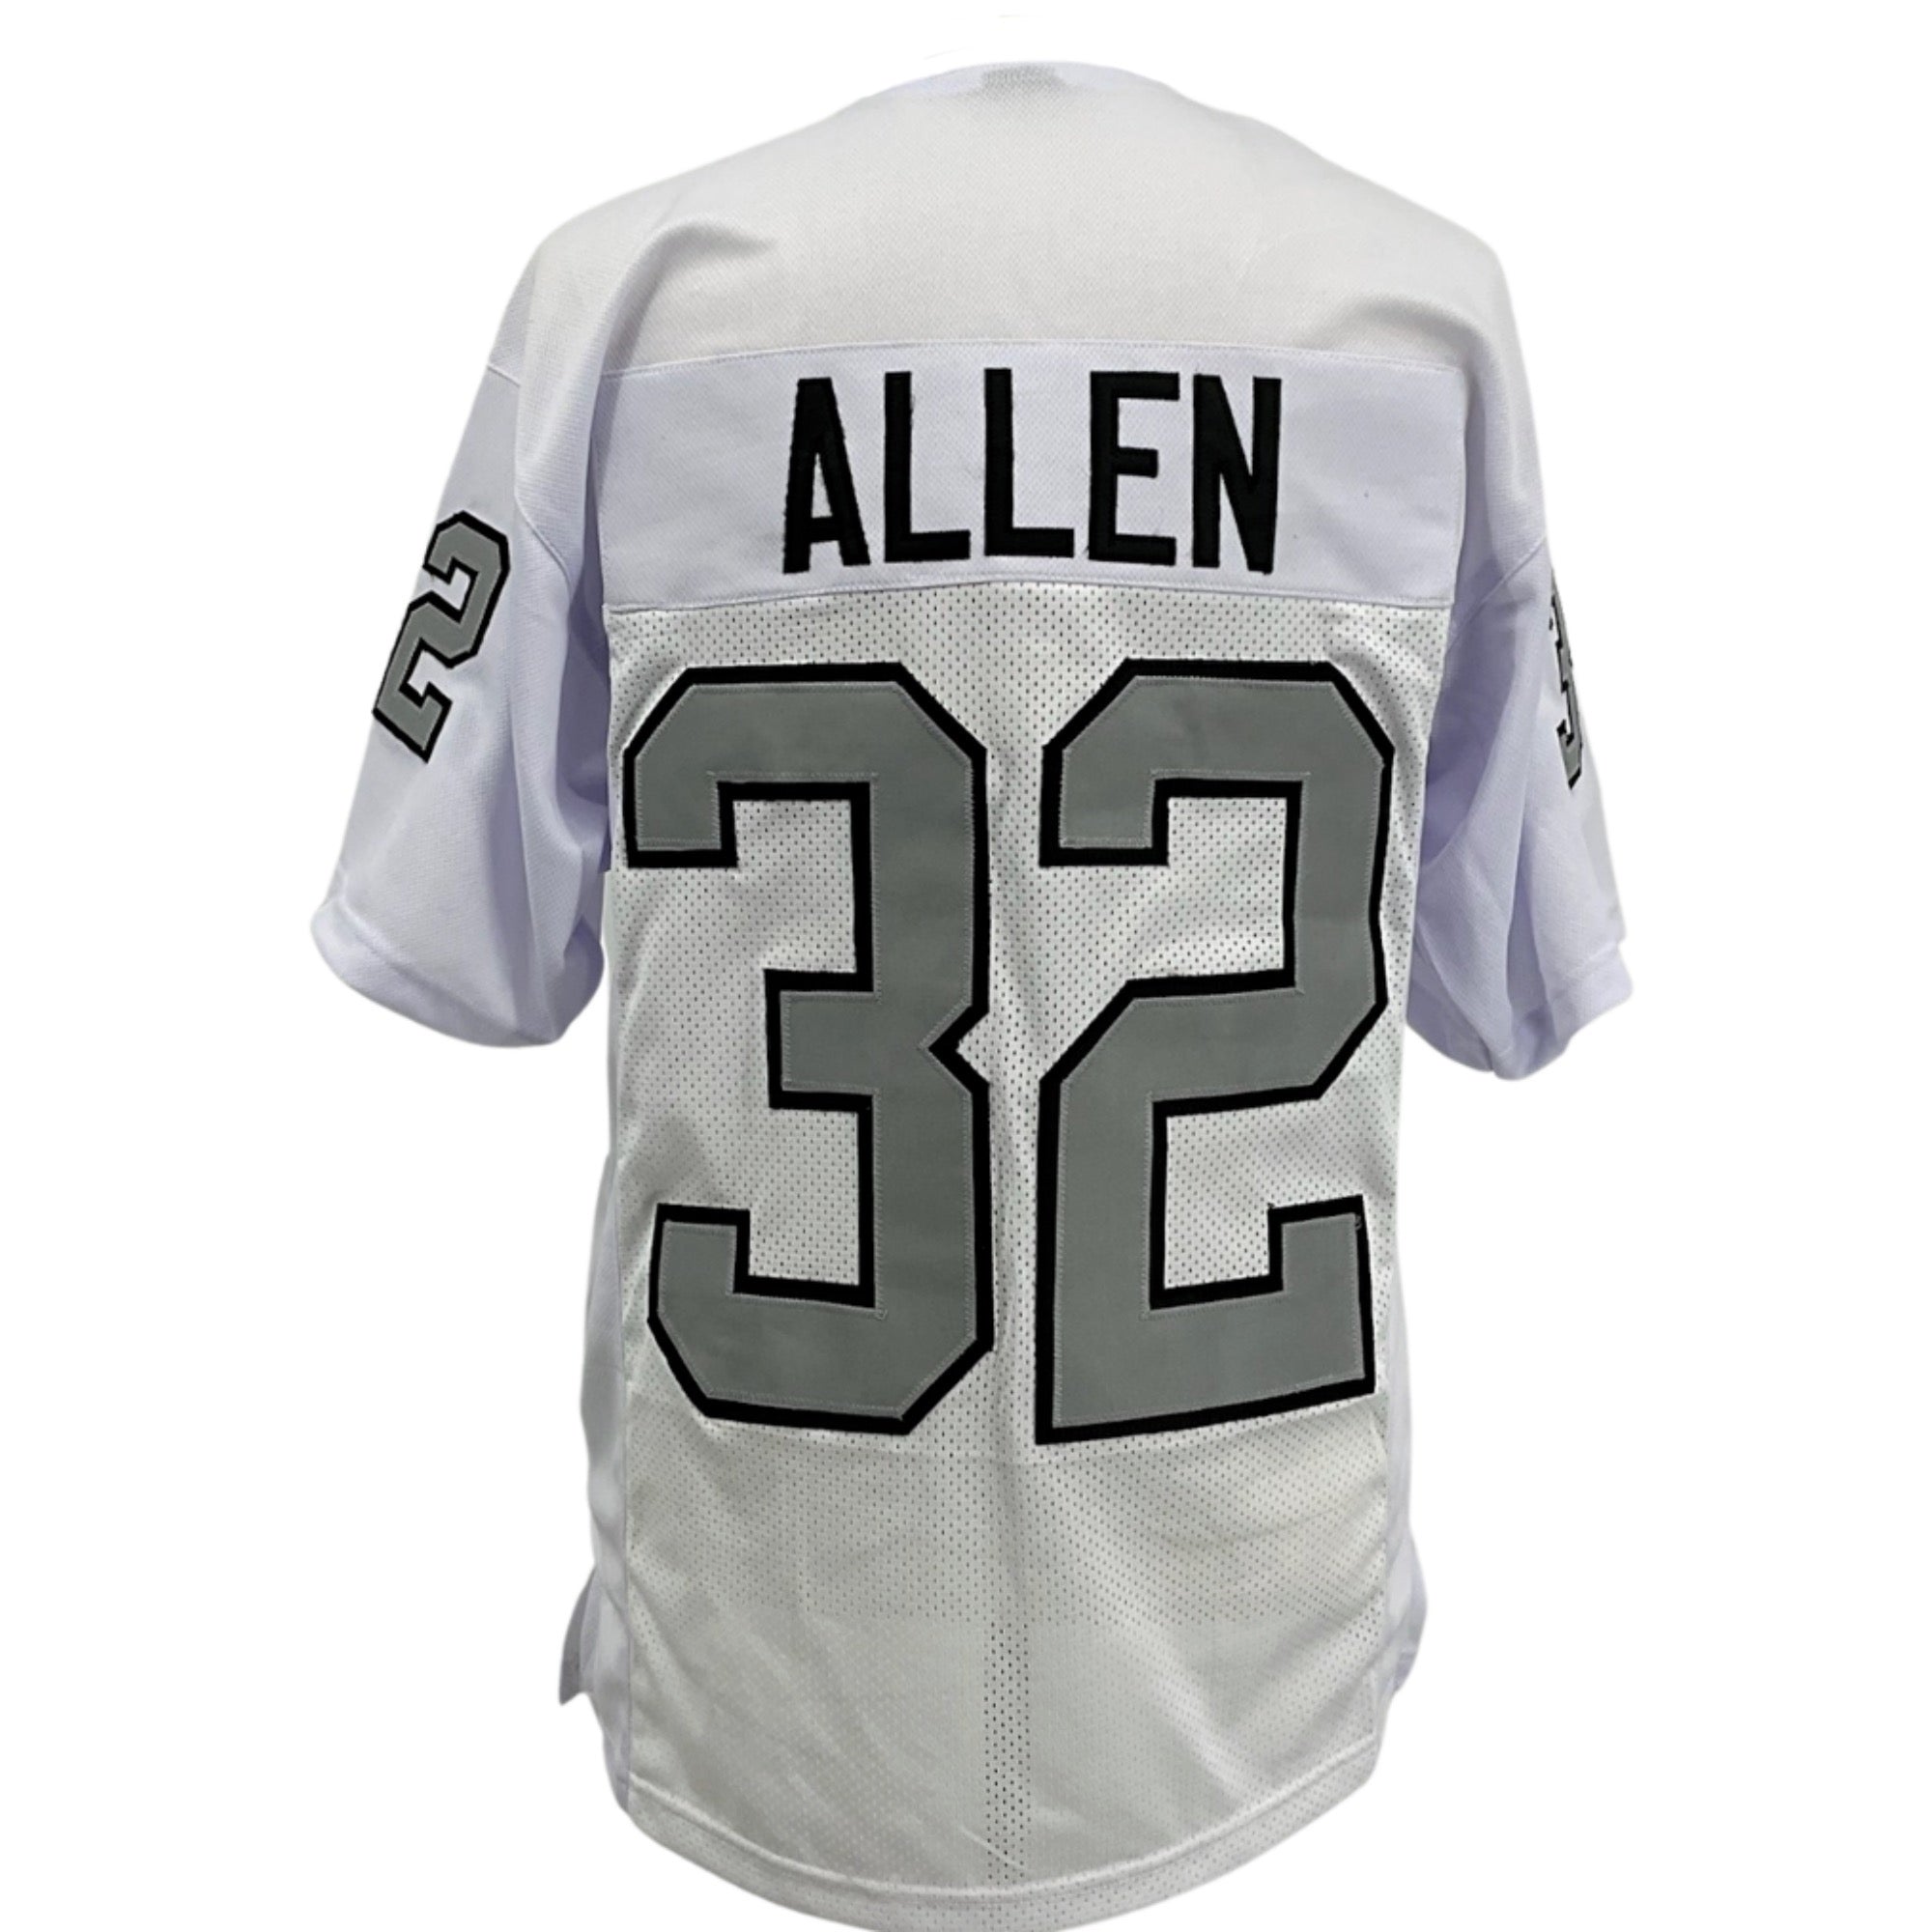 MARCUS ALLEN Los Angeles Raiders WHITE Jersey S/B M-5XL Unsigned Sewn Stitched